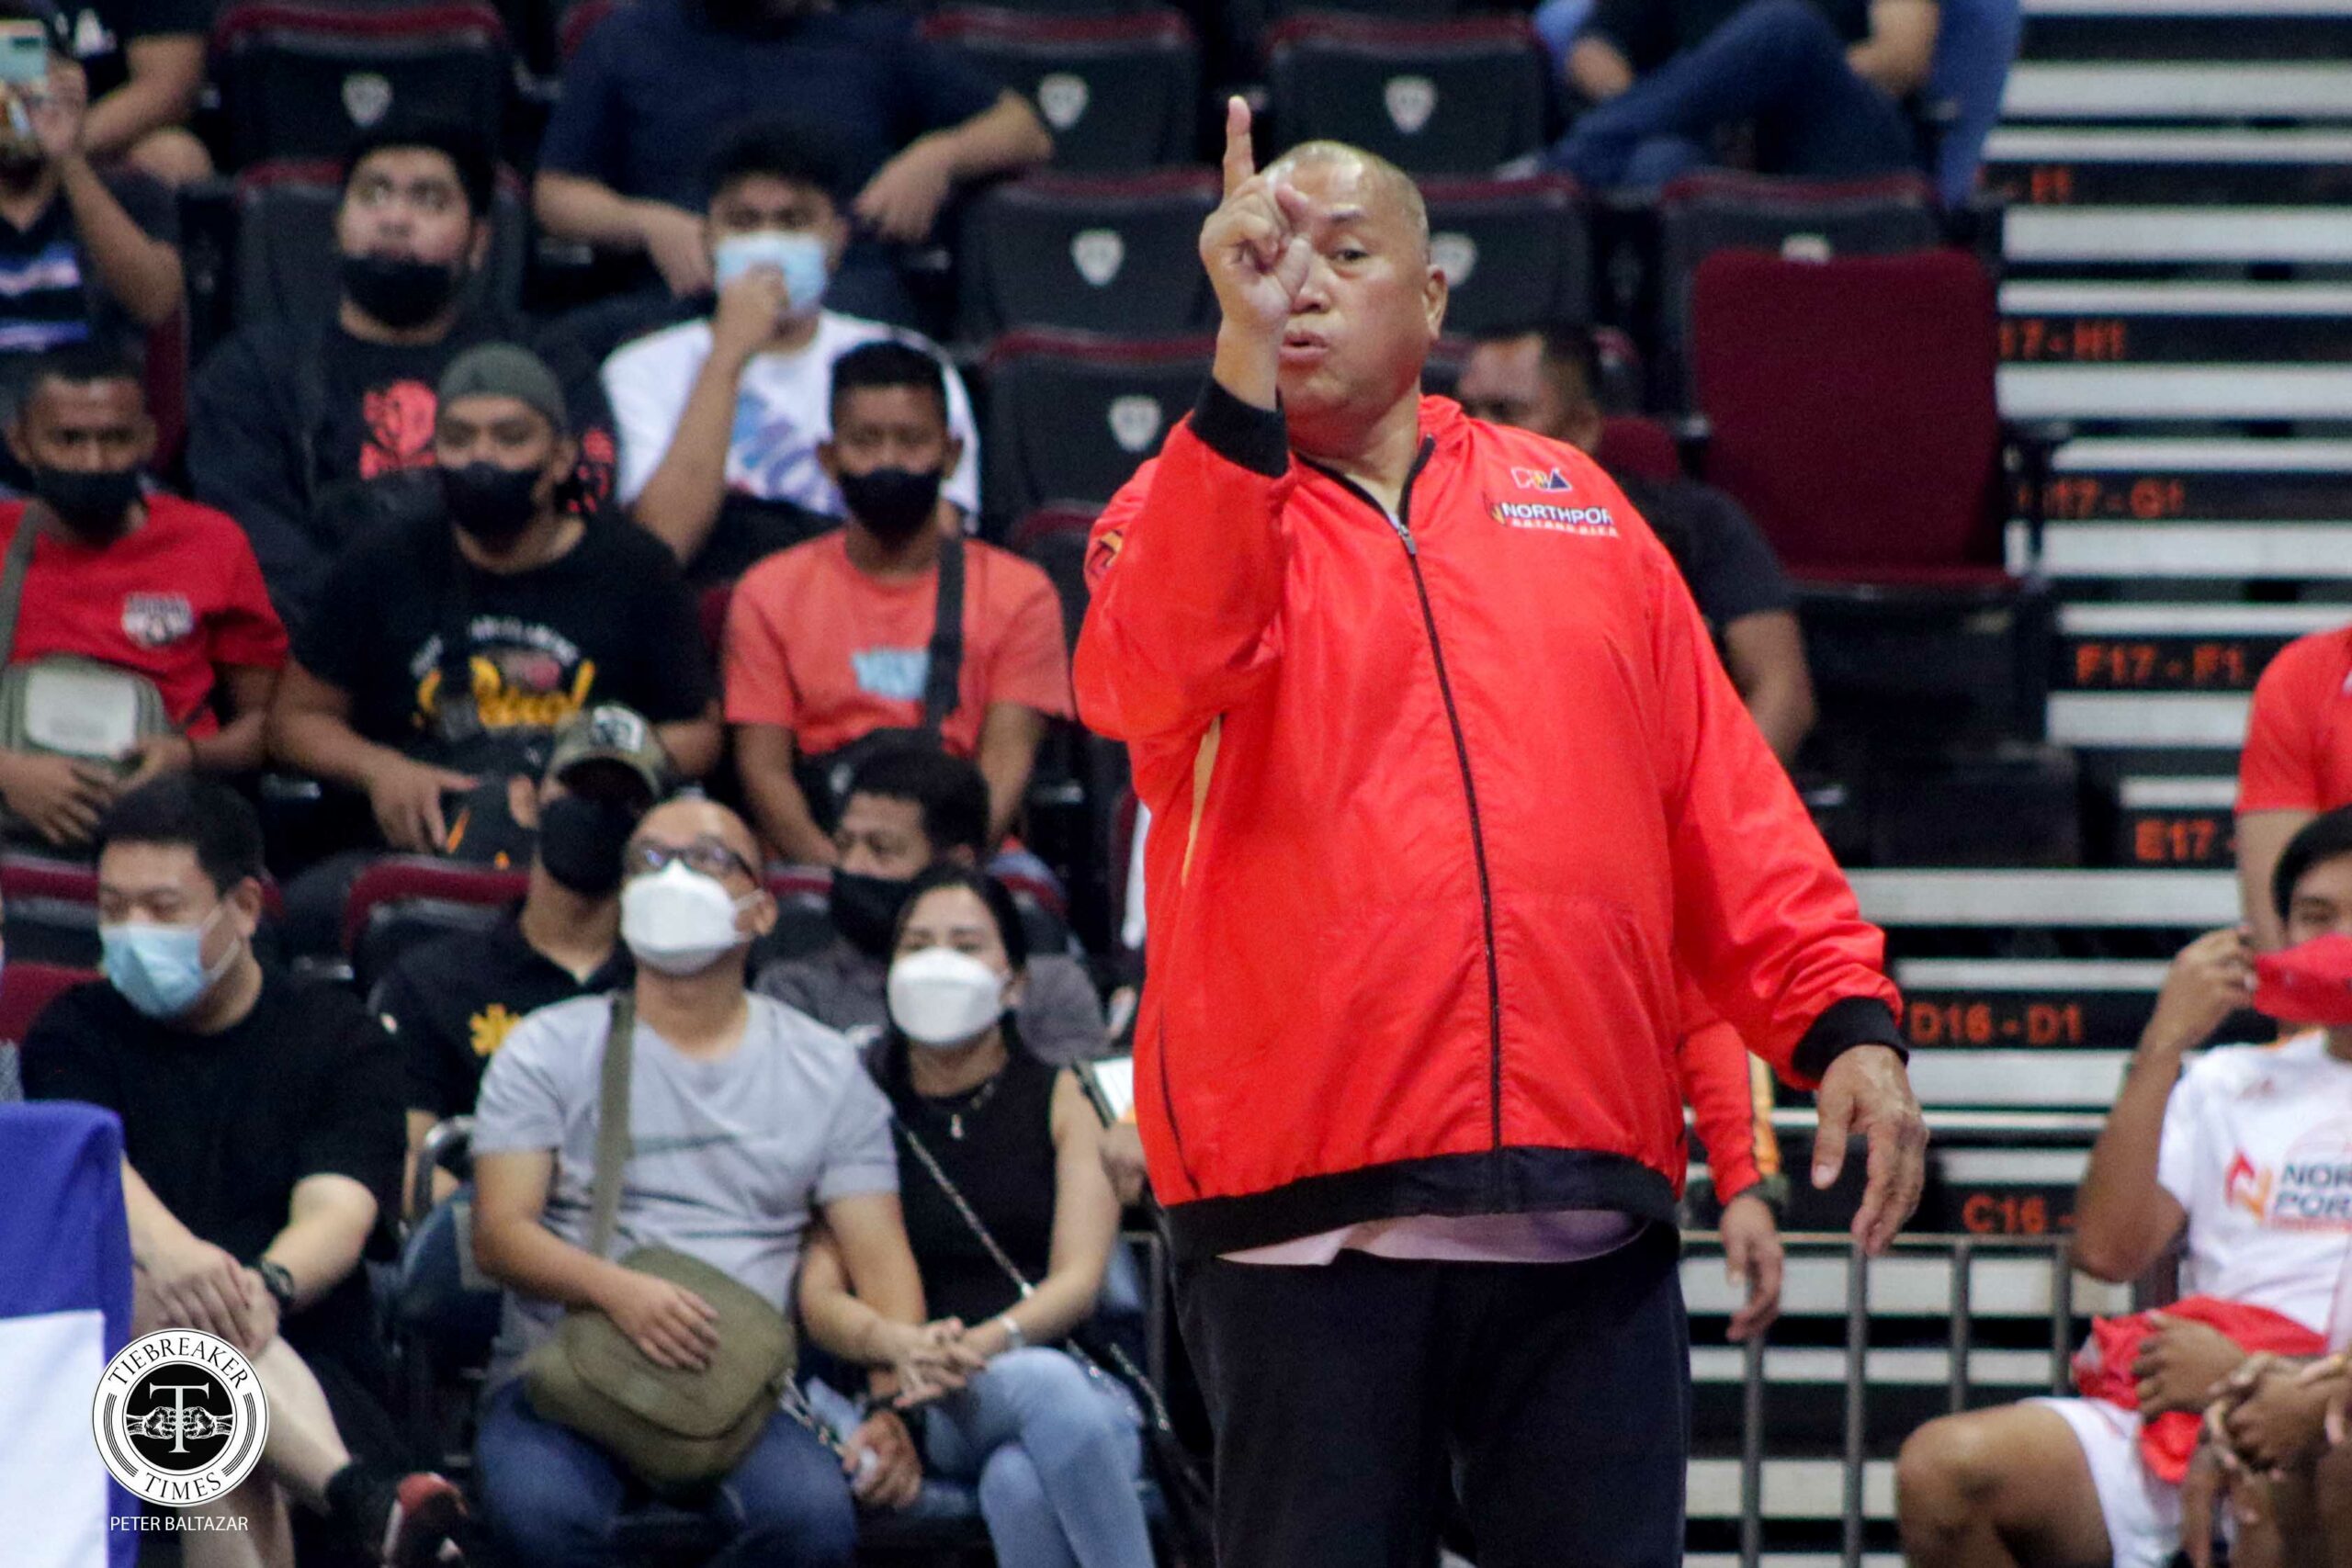 2022-PBA-Commissioners-Cup-Bay-Area-vs-Northport-Pido-Jarencio-scaled Goorjian plays down brief confrontation with Pido: 'It's us that has to learn' Basketball News PBA  - philippine sports news